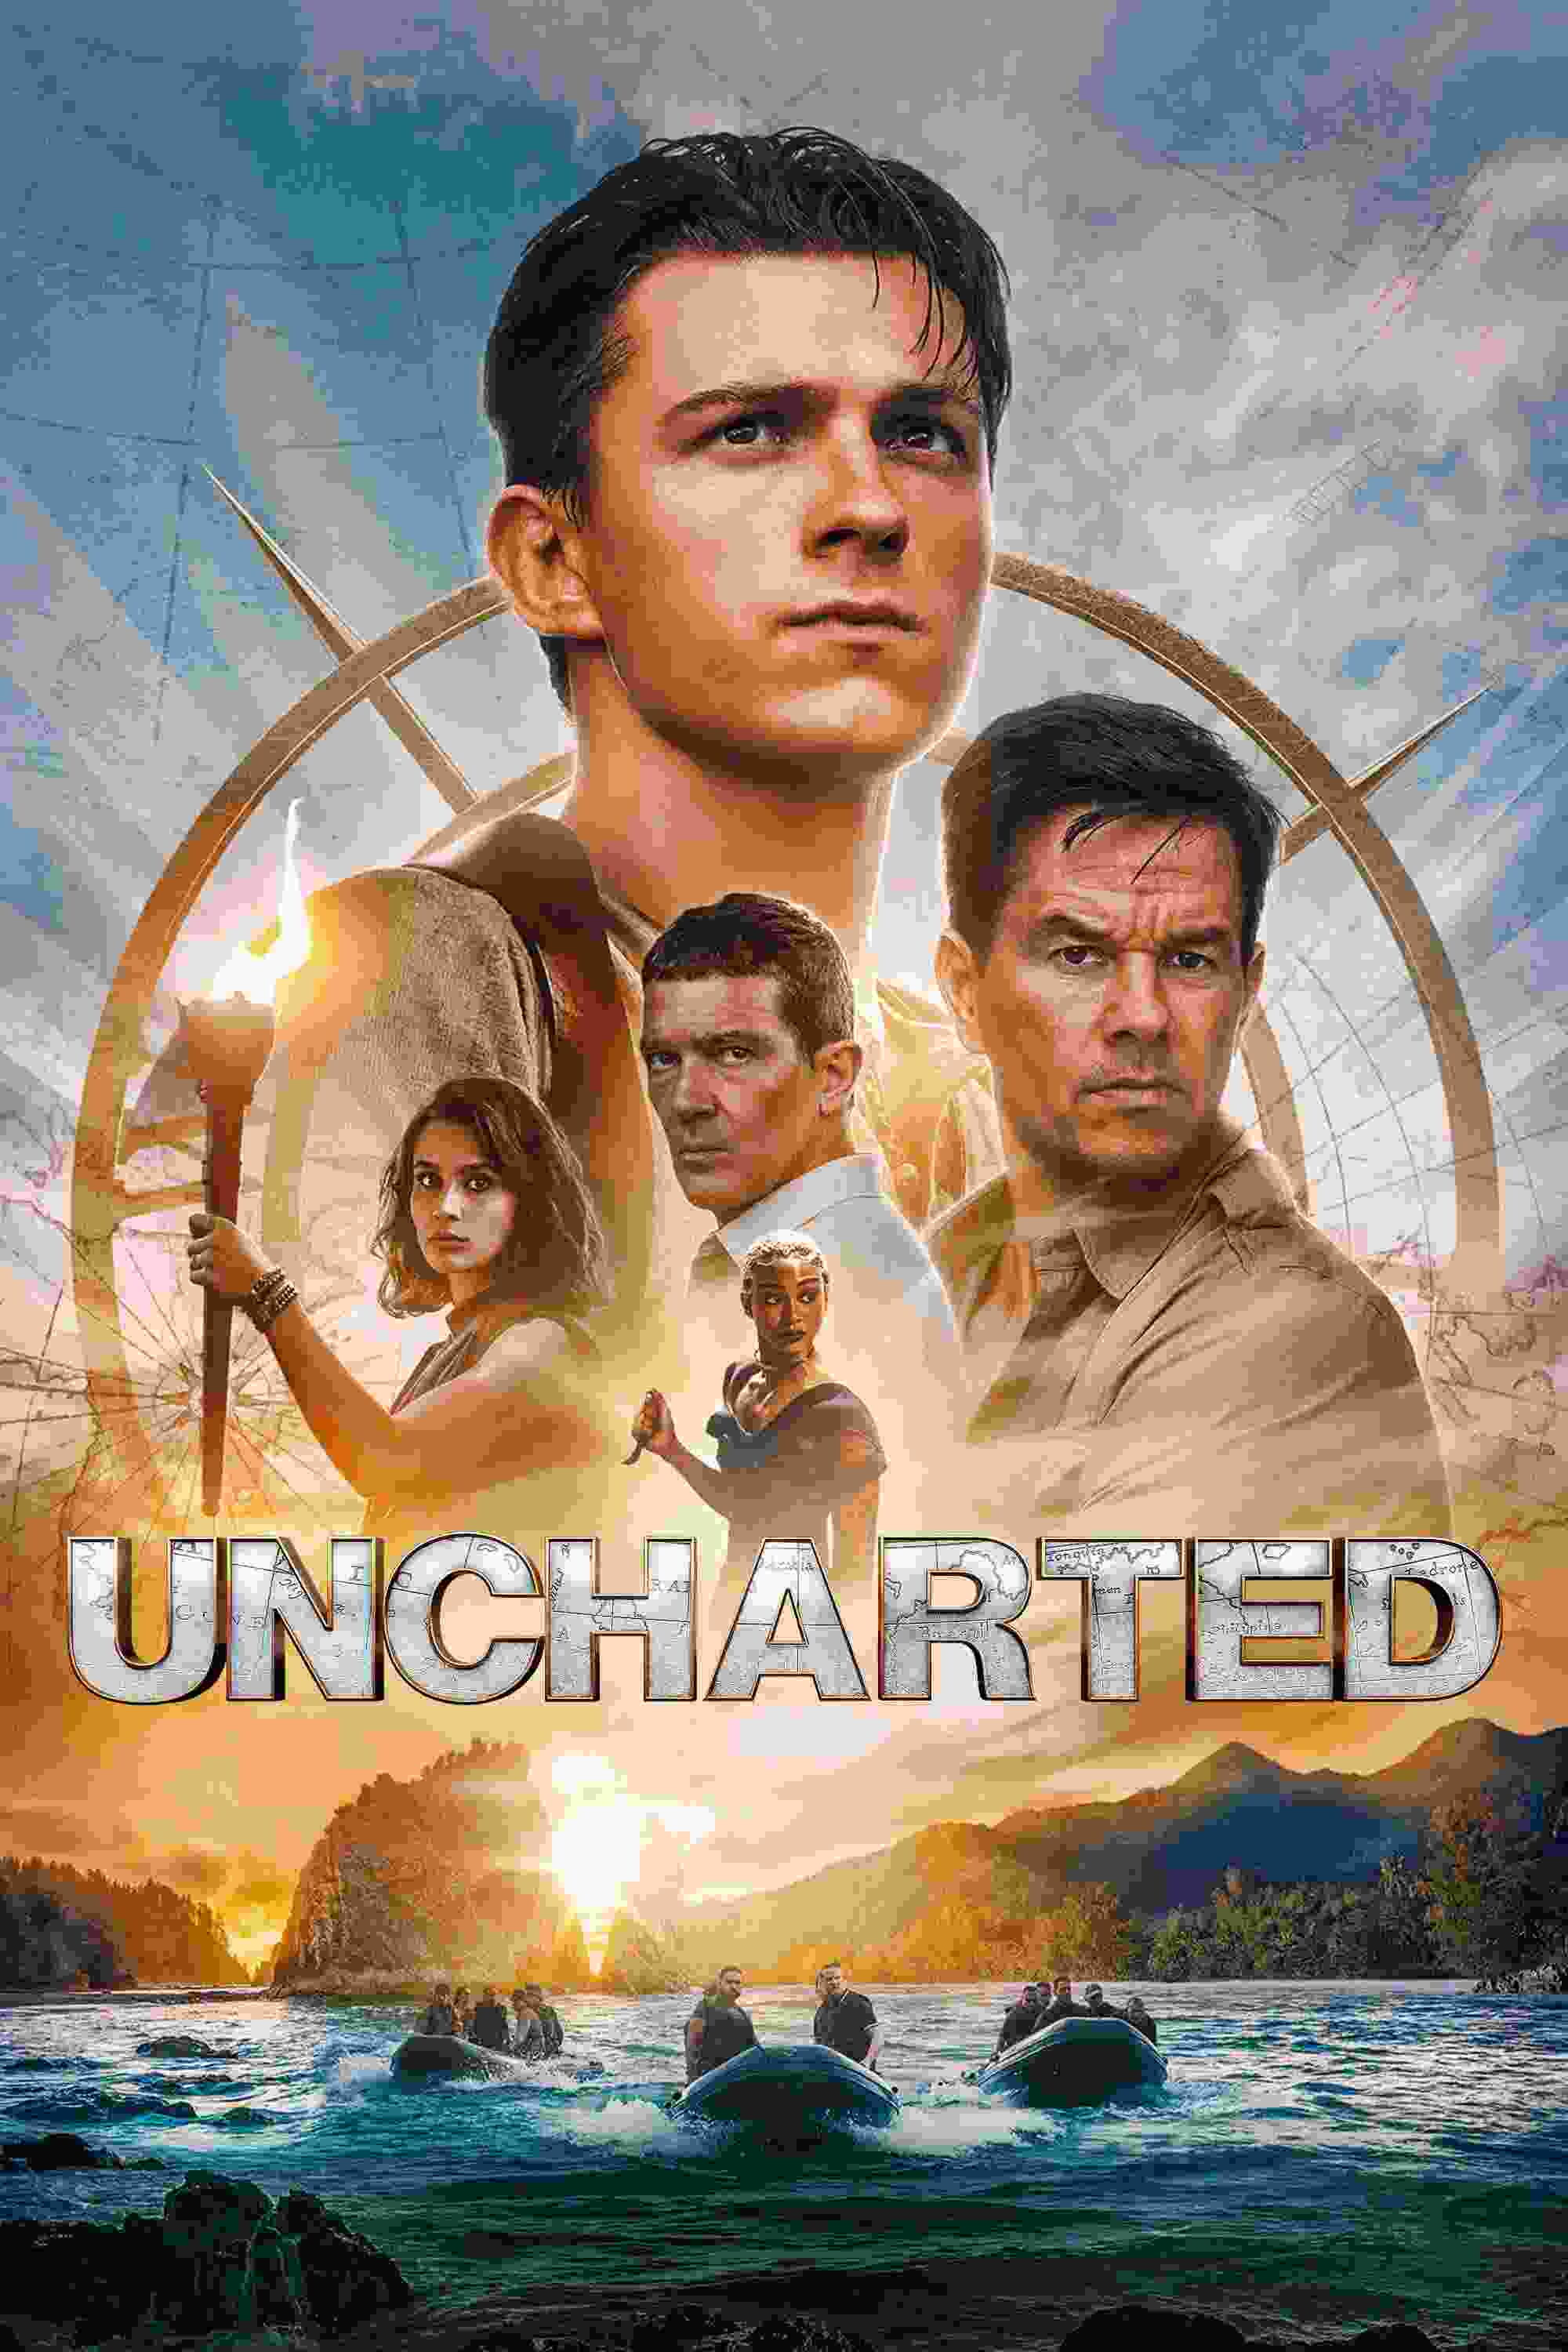 Uncharted (2022) Tom Holland